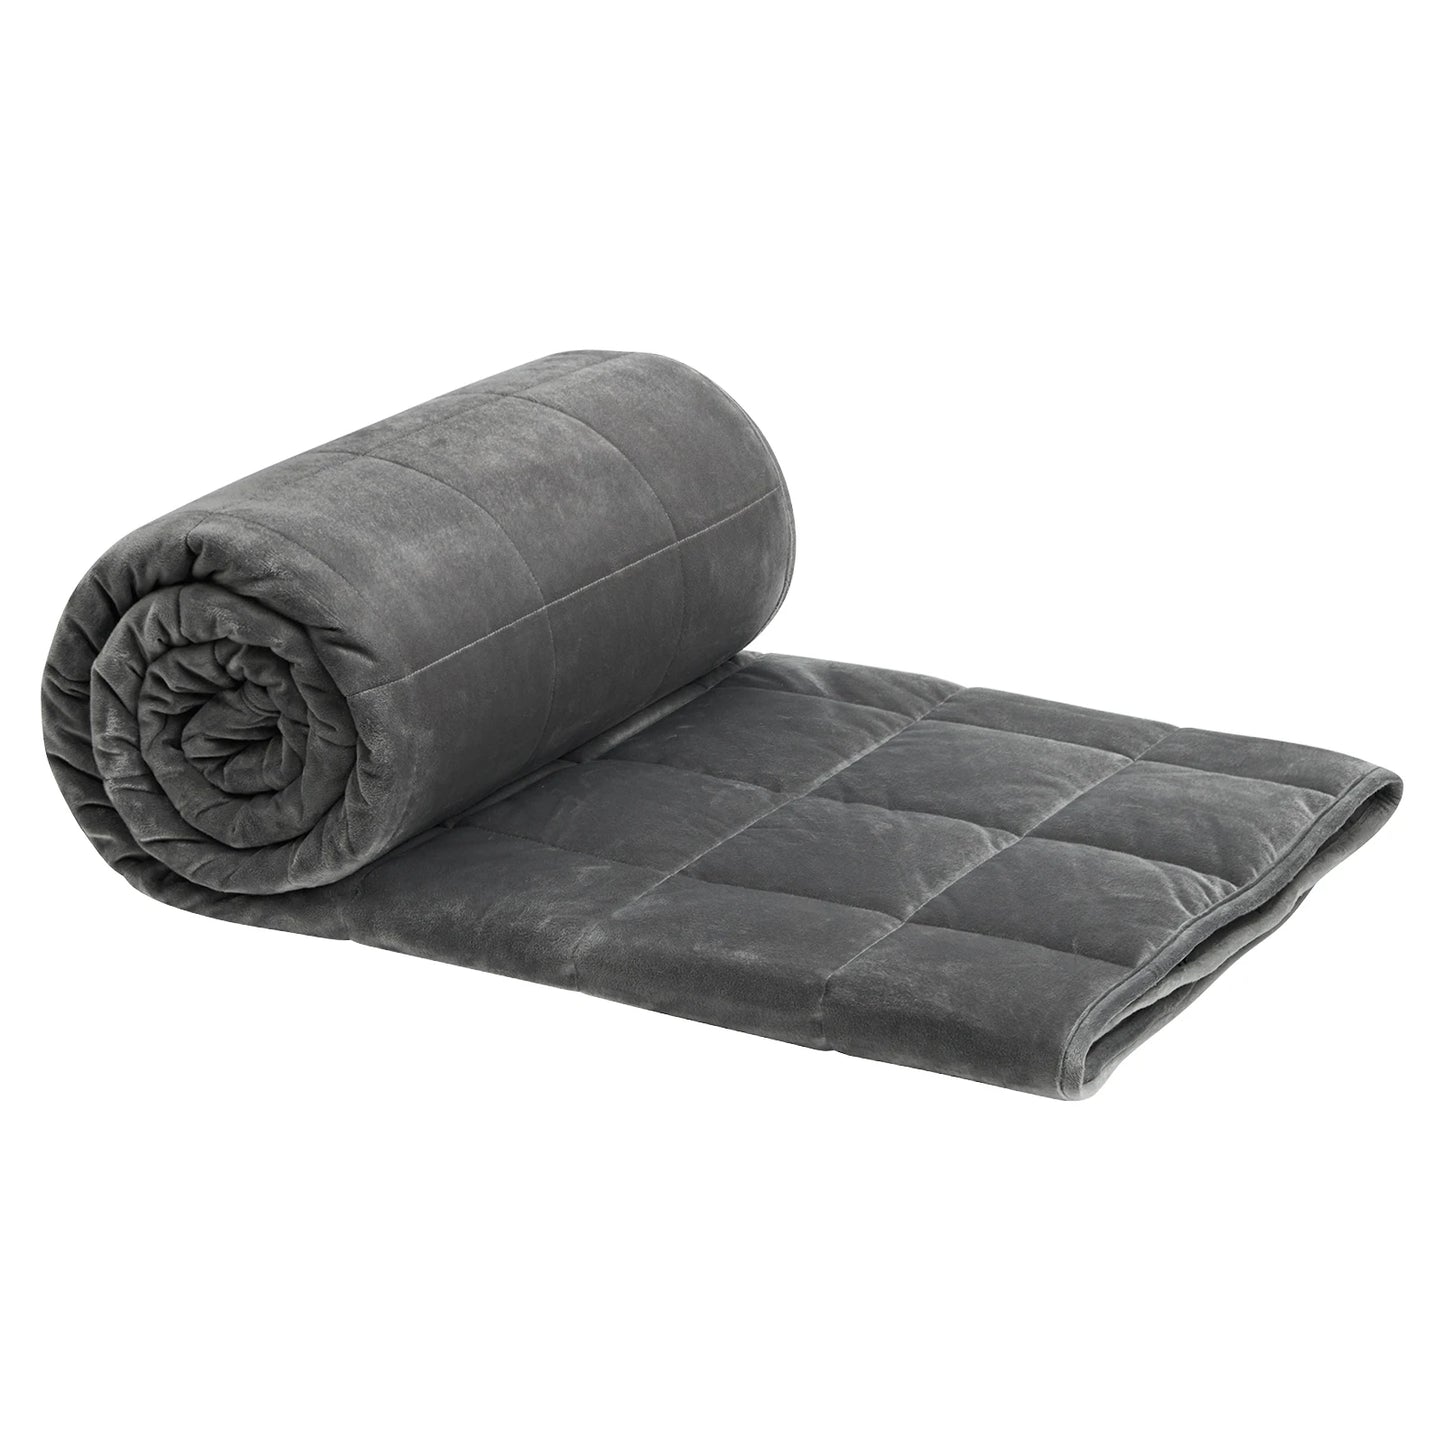 Harmony Heal Weighted Therapy Blanket